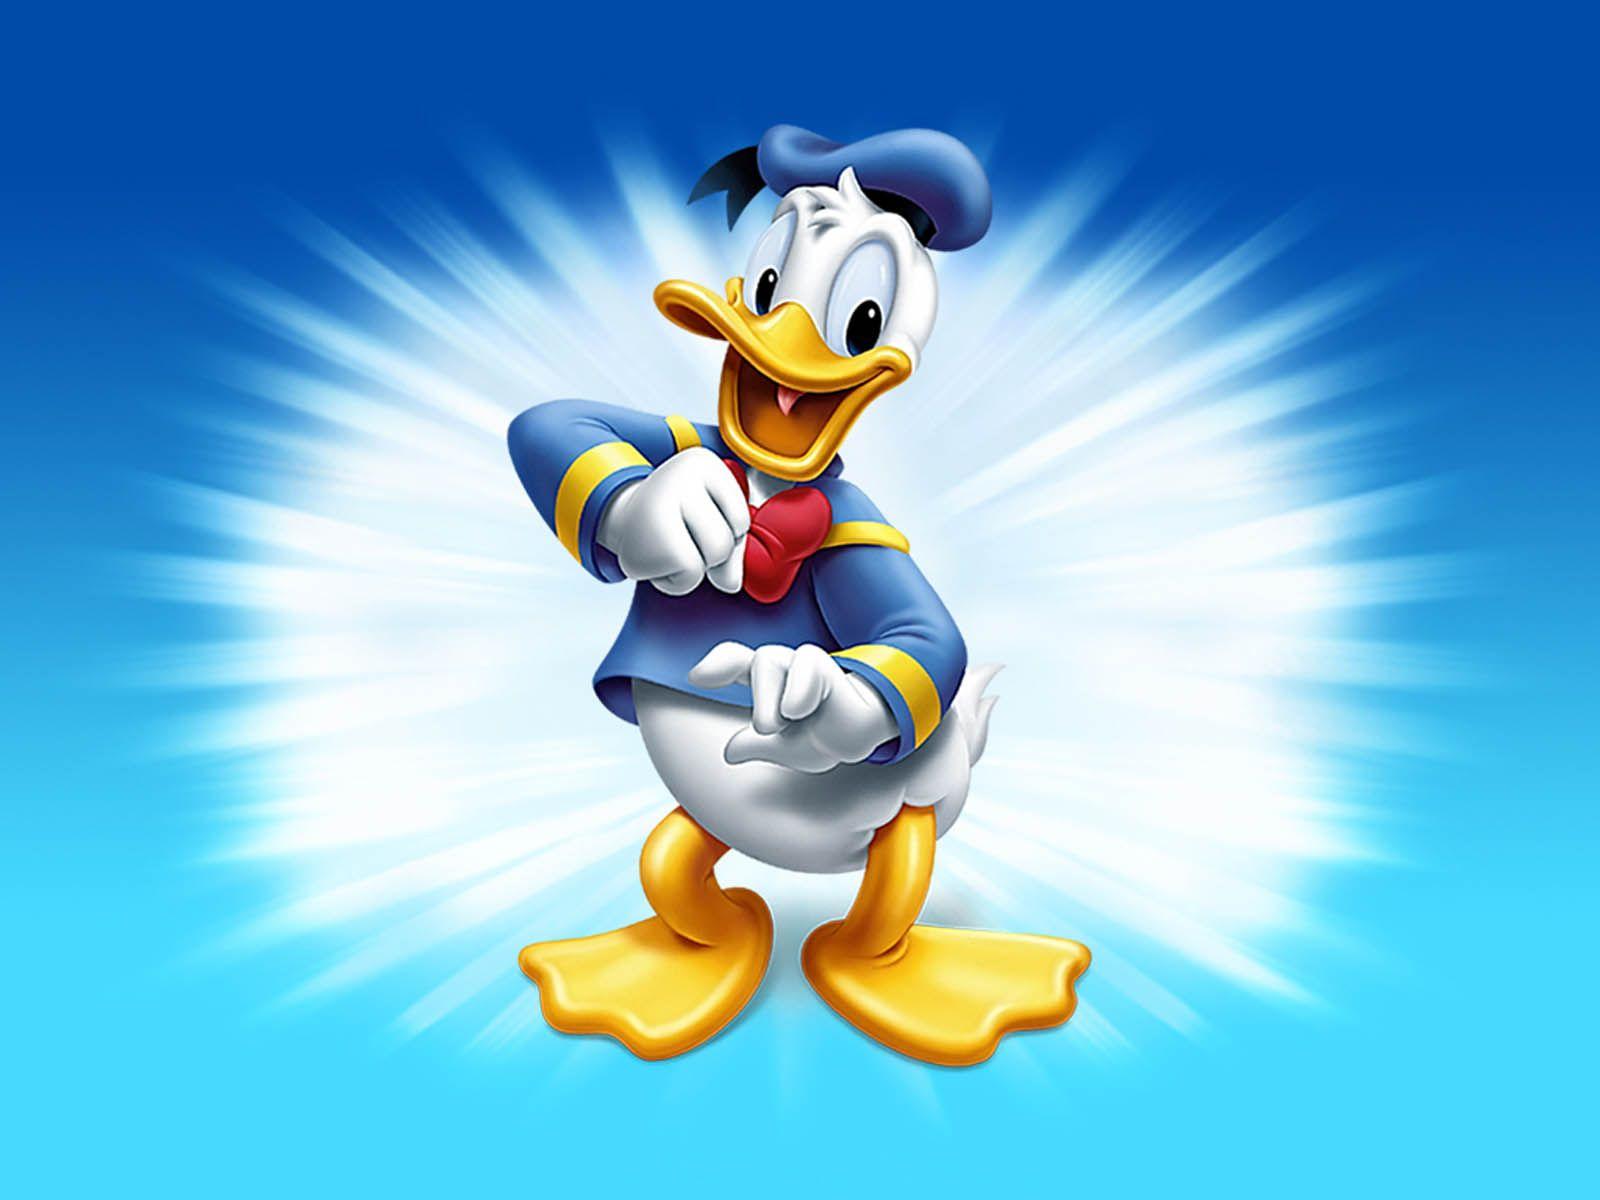 DONALD DUCK HD WALLPAPERS. FREE HD WALLPAPERS. Cute cartoon wallpaper, Cartoon wallpaper, Duck wallpaper